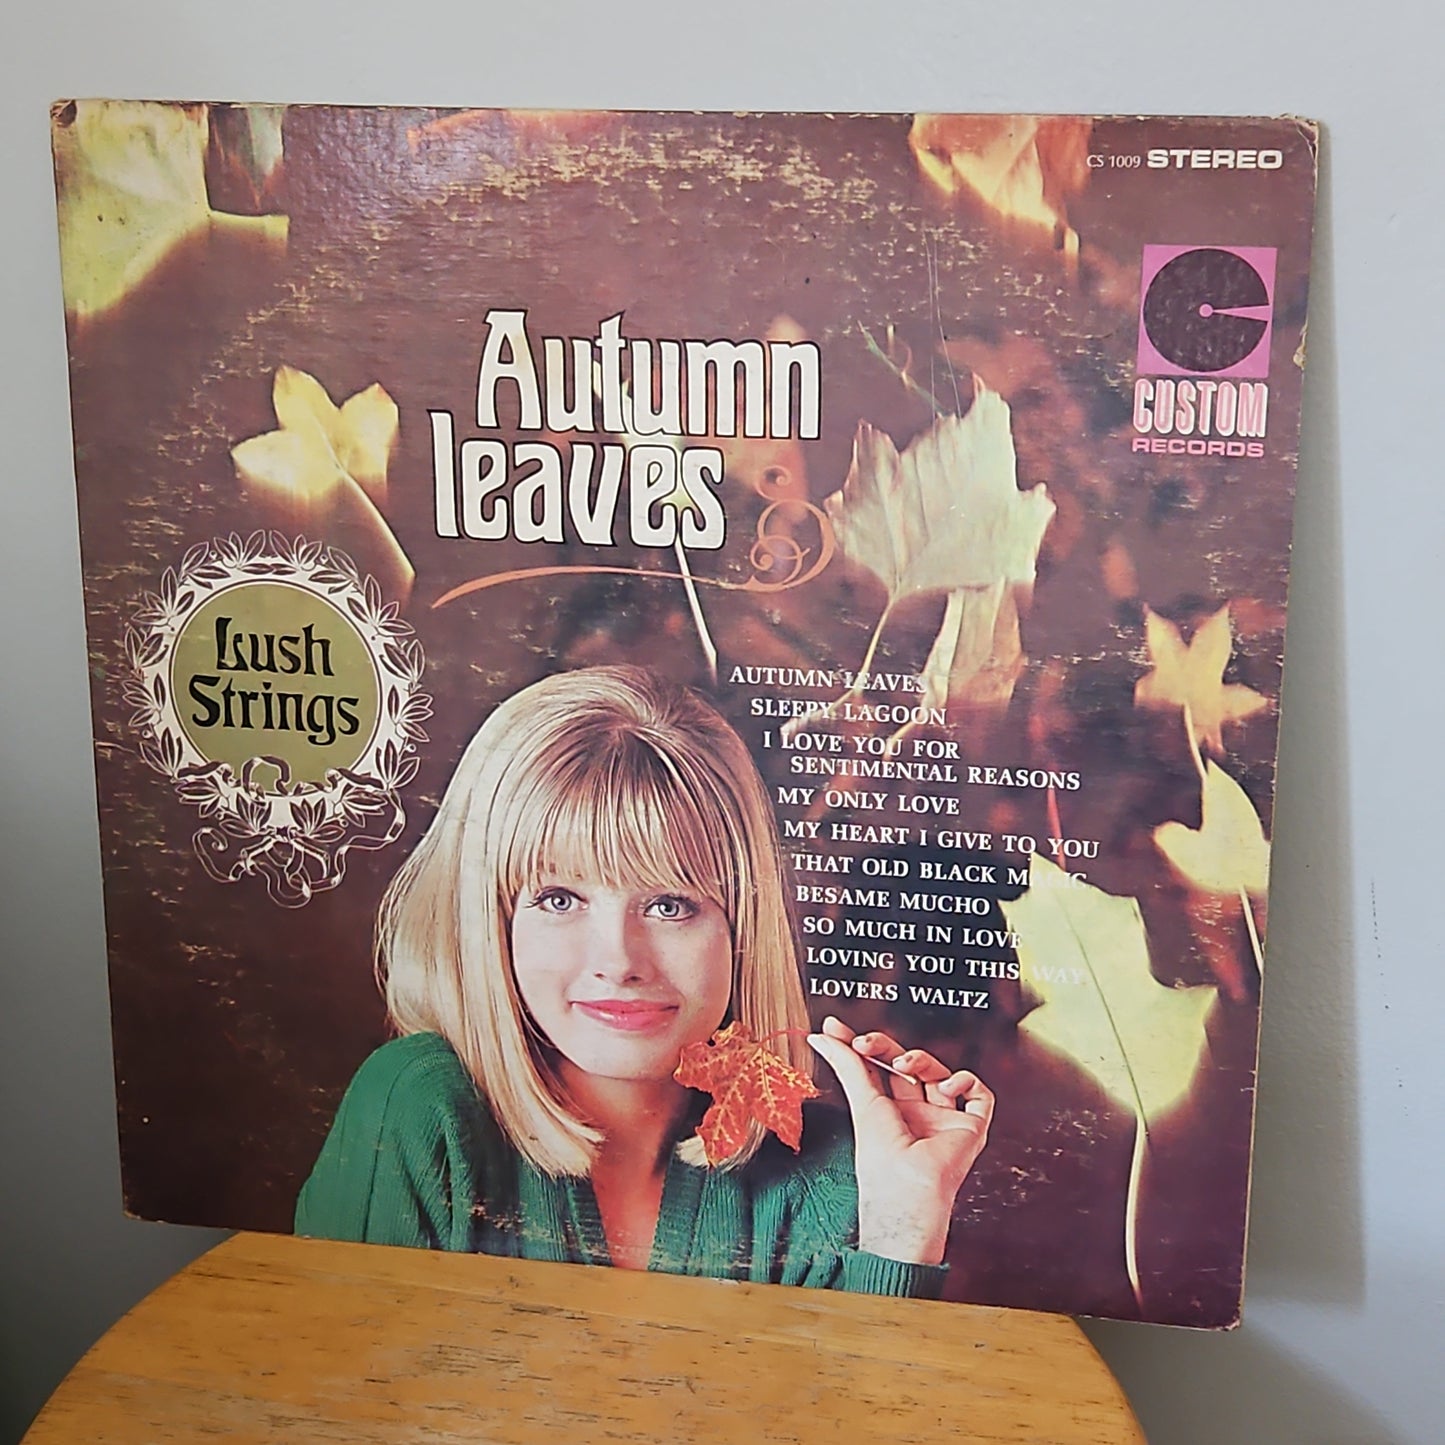 Lush Strings Autumn Leaves By Custom Records